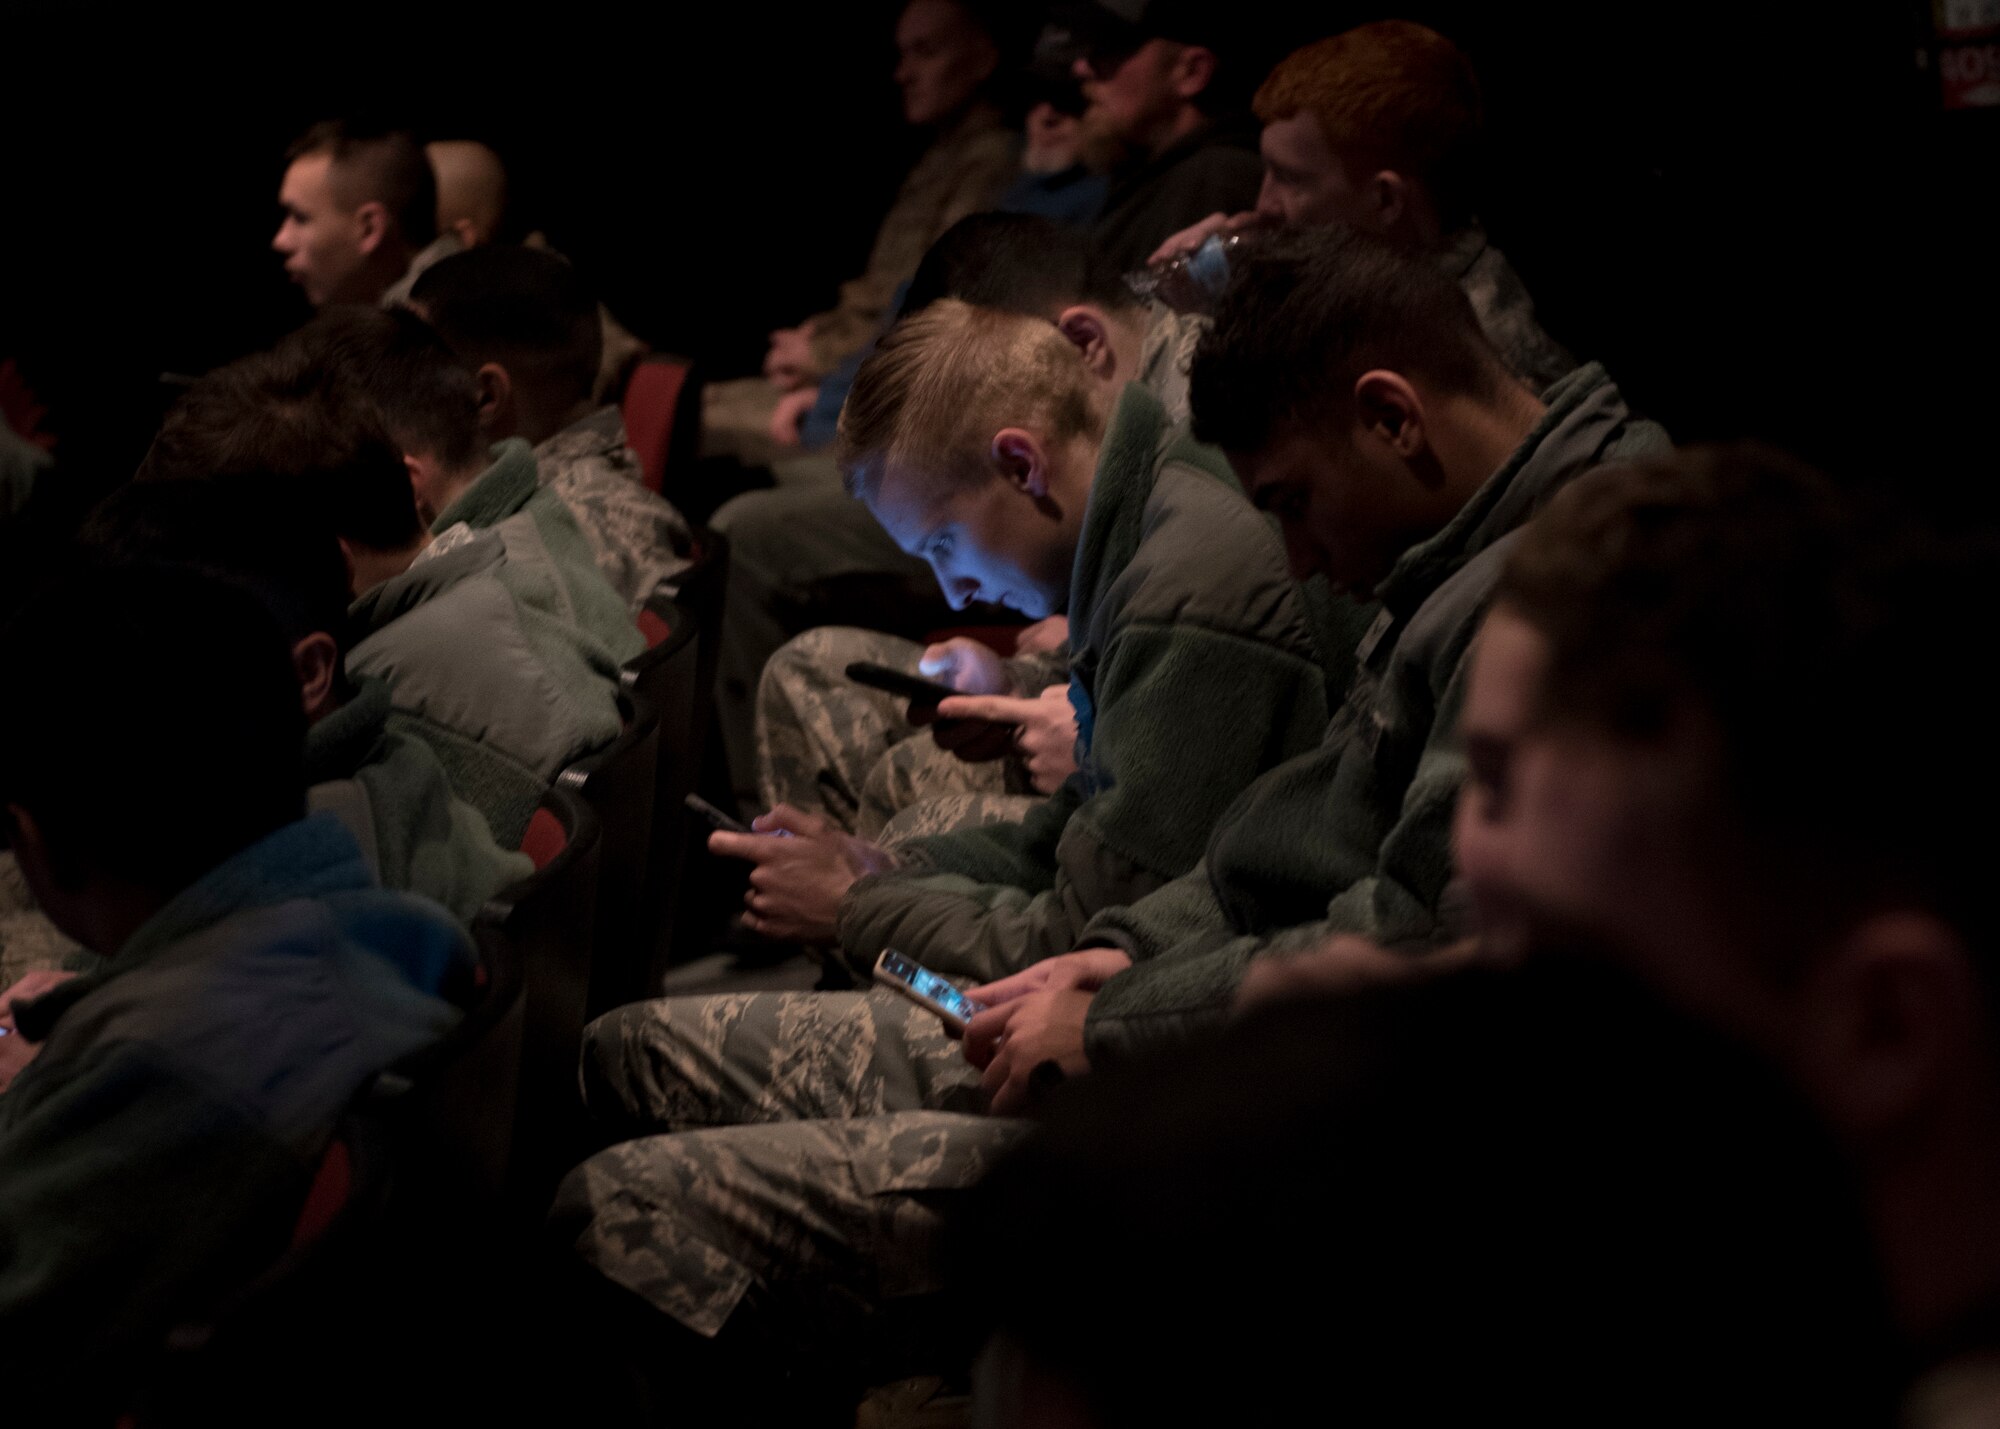 Airmen attending an all-call meeting connect to the online presentation via personal smart phones at Fairchild Air Force Base, Washington, Jan. 15, 2020. First pioneered at the base in 2017, connecting meeting attendees via smart devices helps commanders engage with large groups of Airmen in real time though polls, quizzes, feedback and questions. (U.S. Air Force photo by Staff Sgt. Ryan Lackey)